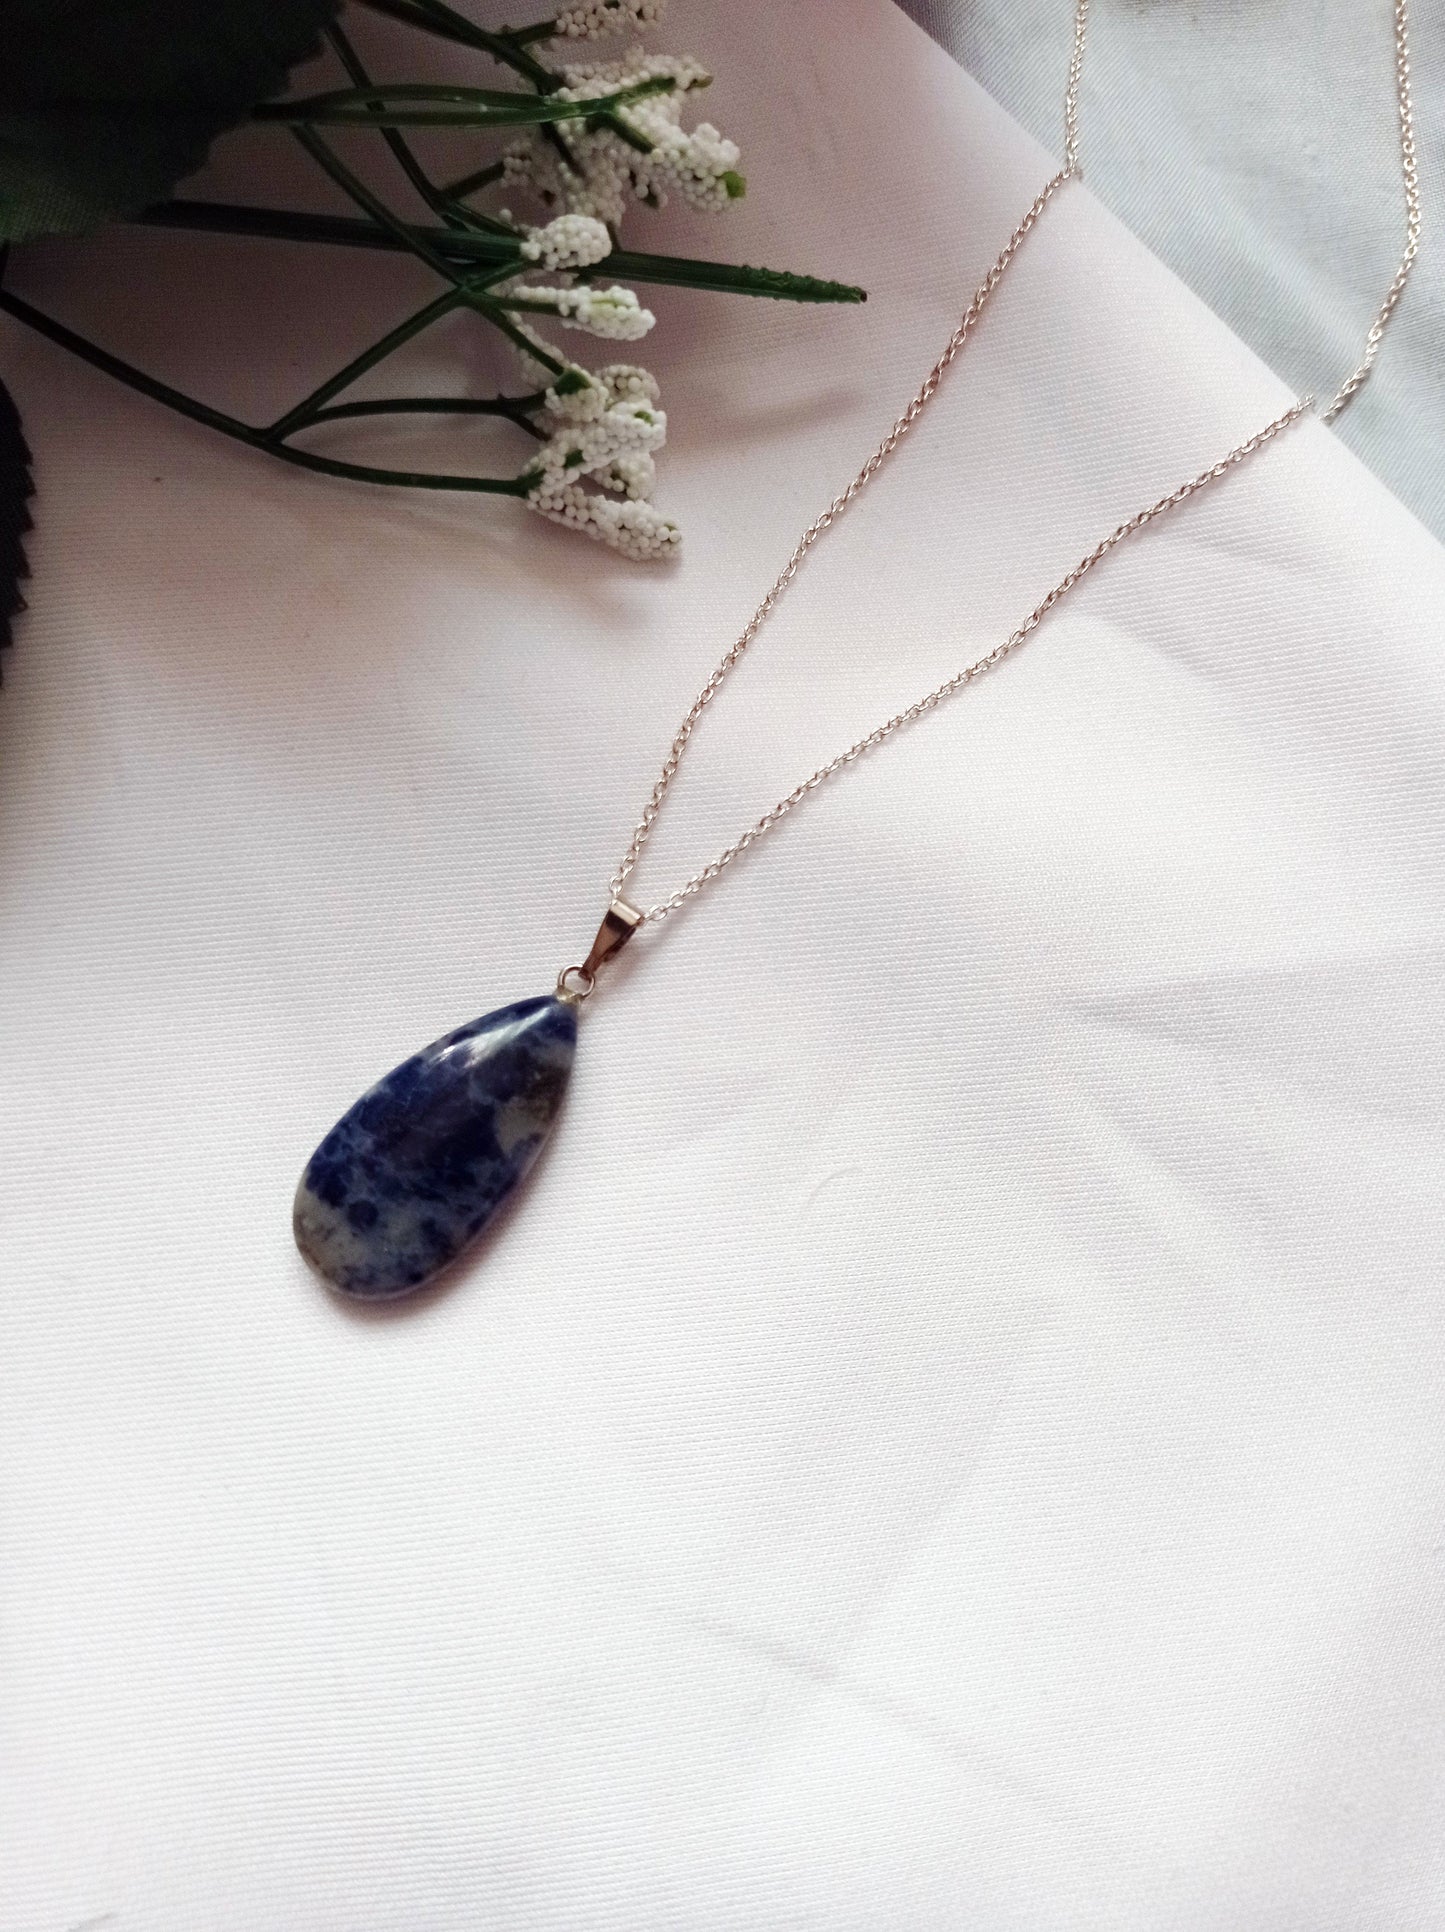 Sodalite Sterling Silver Necklace, Sodalite Pendant Necklace, Gemstone Necklace | by nlanlaVictory-2